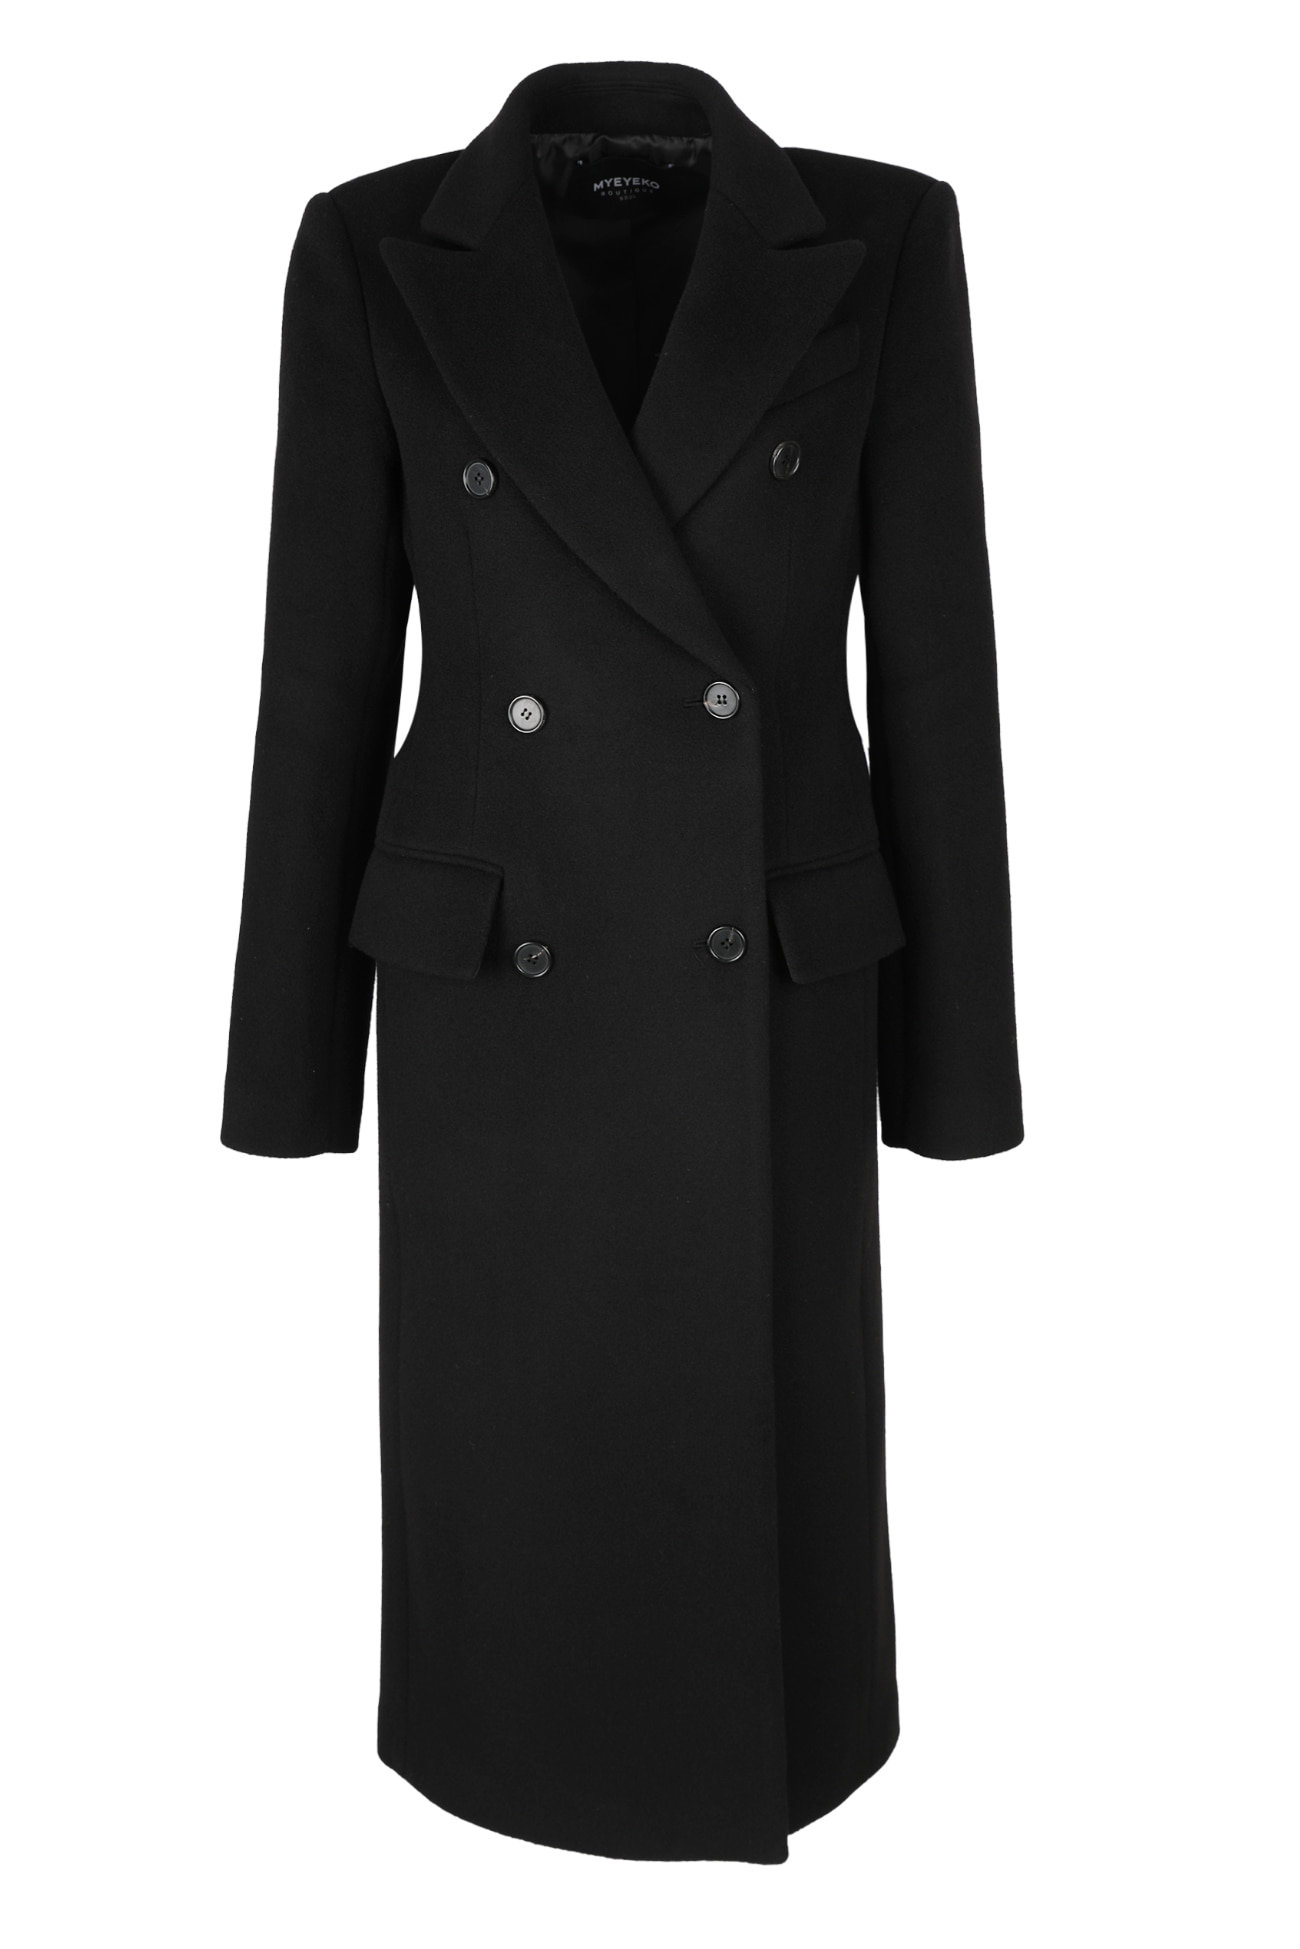 HIGH QUALITY LINE - Tailored Wool and Cashmere Coat (SO BLACK)